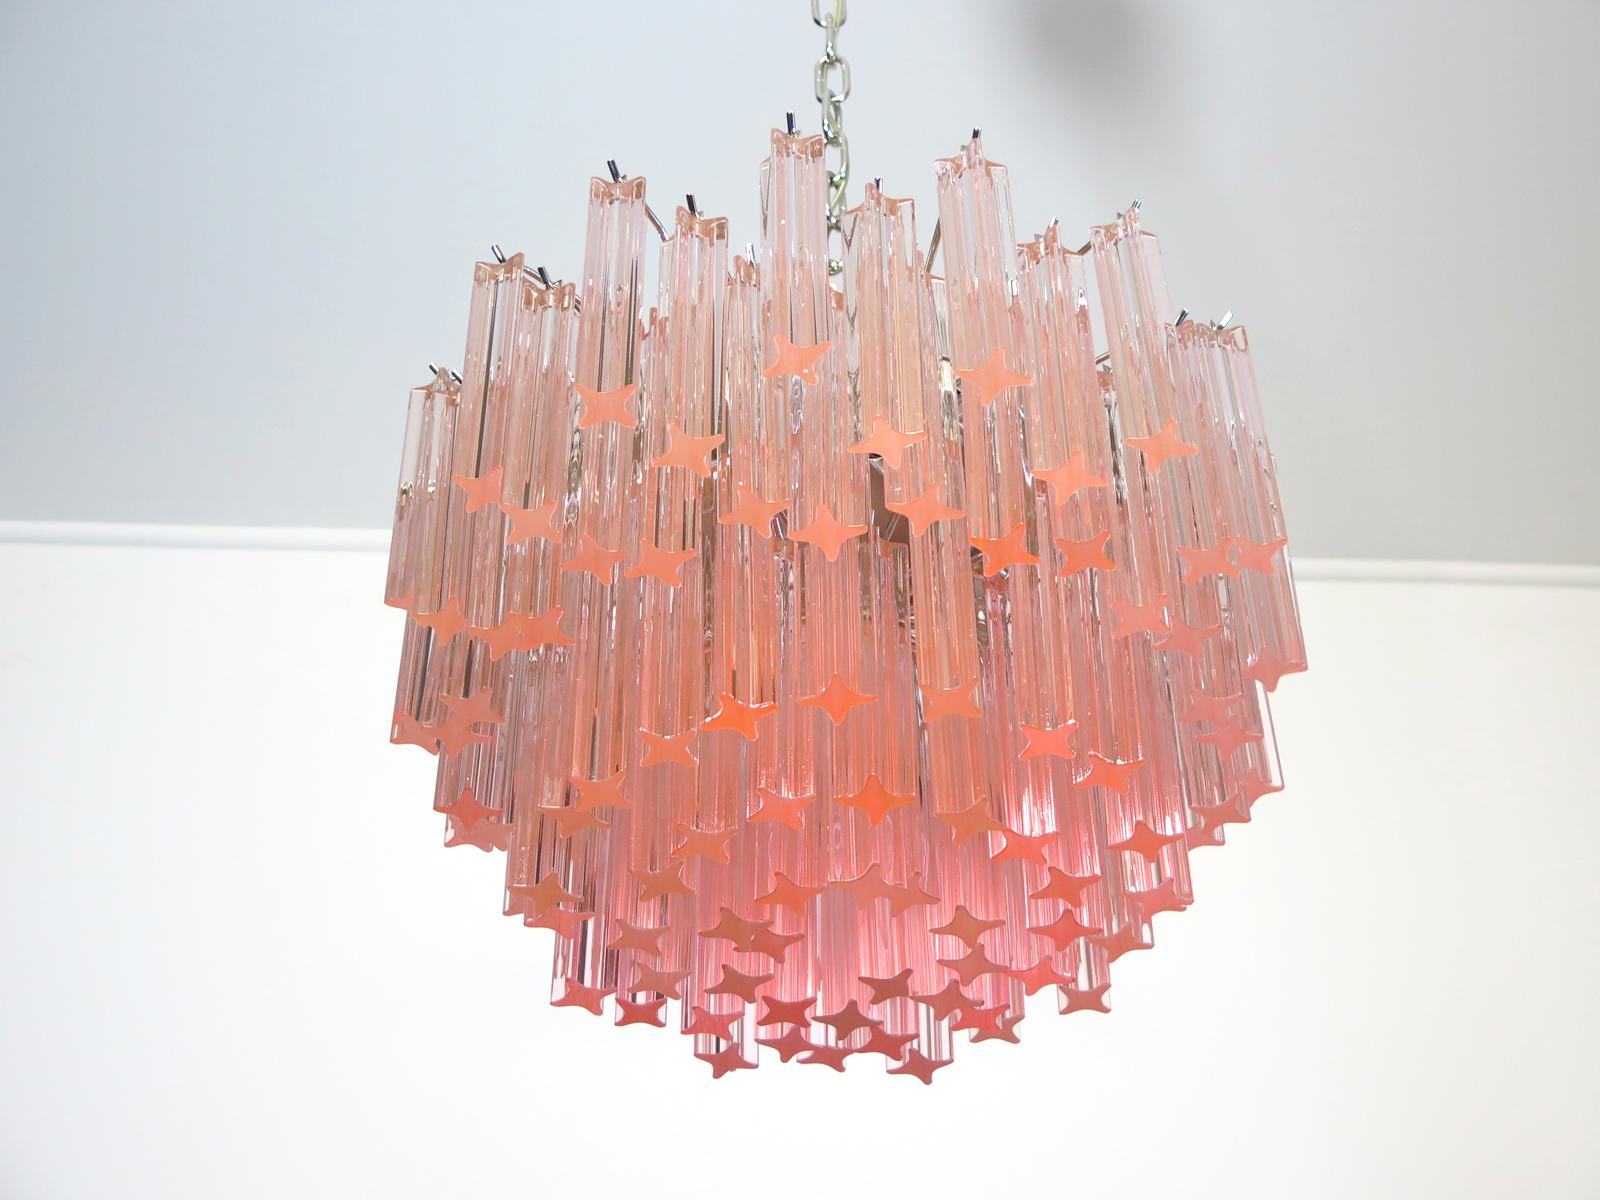 Fantastic vintage Murano chandelier made by 107 crystal prism quadriedri in a nickel metal frame. The glass has a slightly pink color.
Period: 1980s
Dimensions: 45.25 inches height (115 cm) with chain; 15.75 inches height (40 cm) without chain;